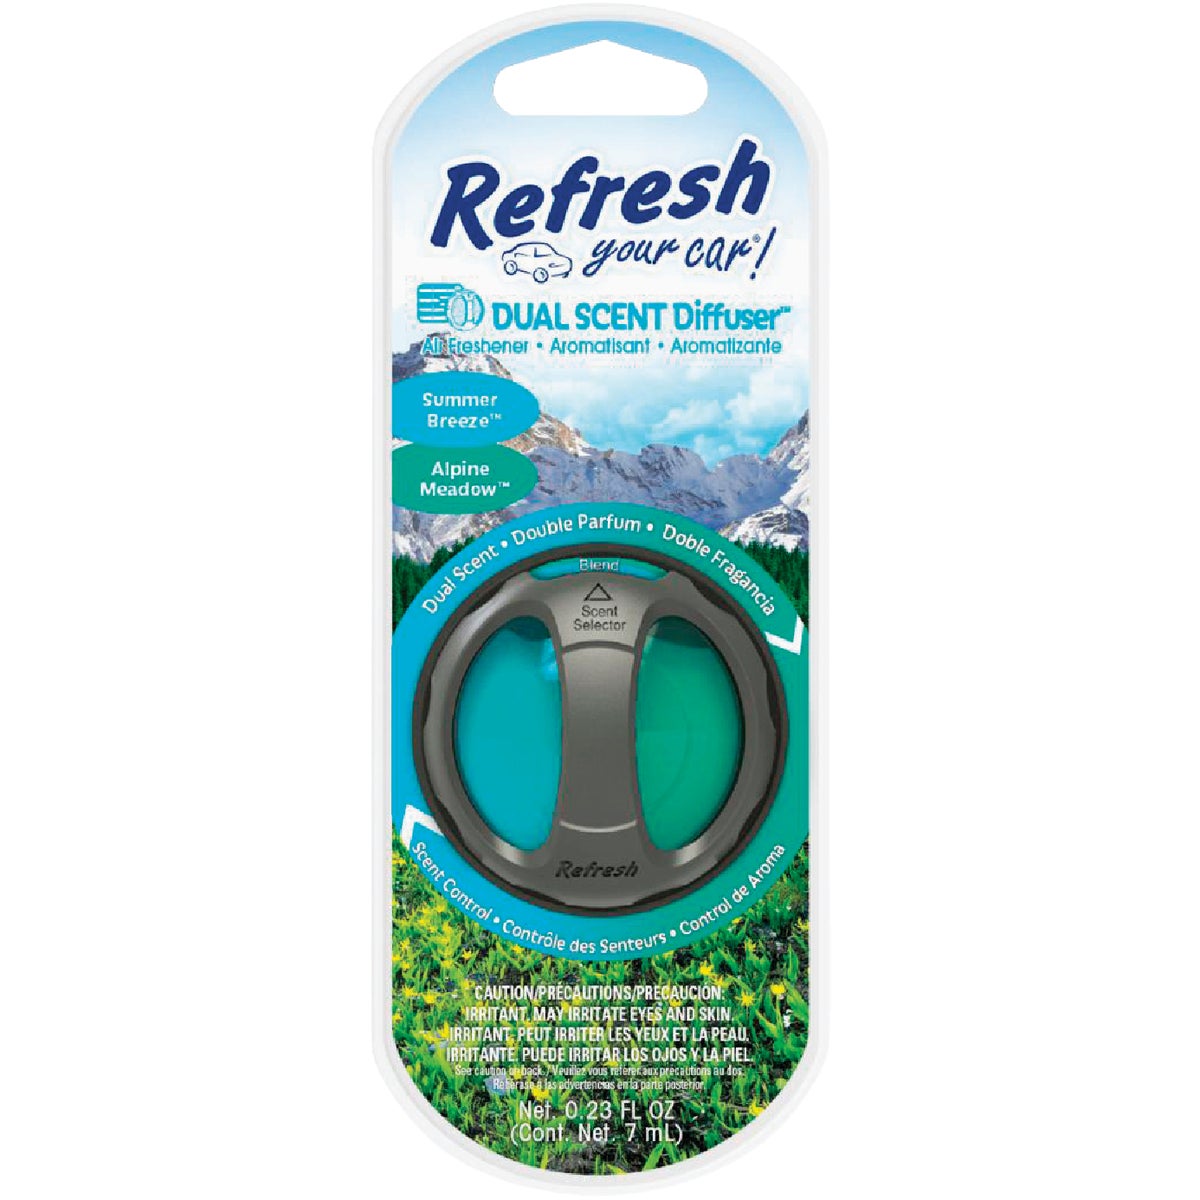 Item 570165, Refresh Your Car delivers quality, innovative products that make time in 